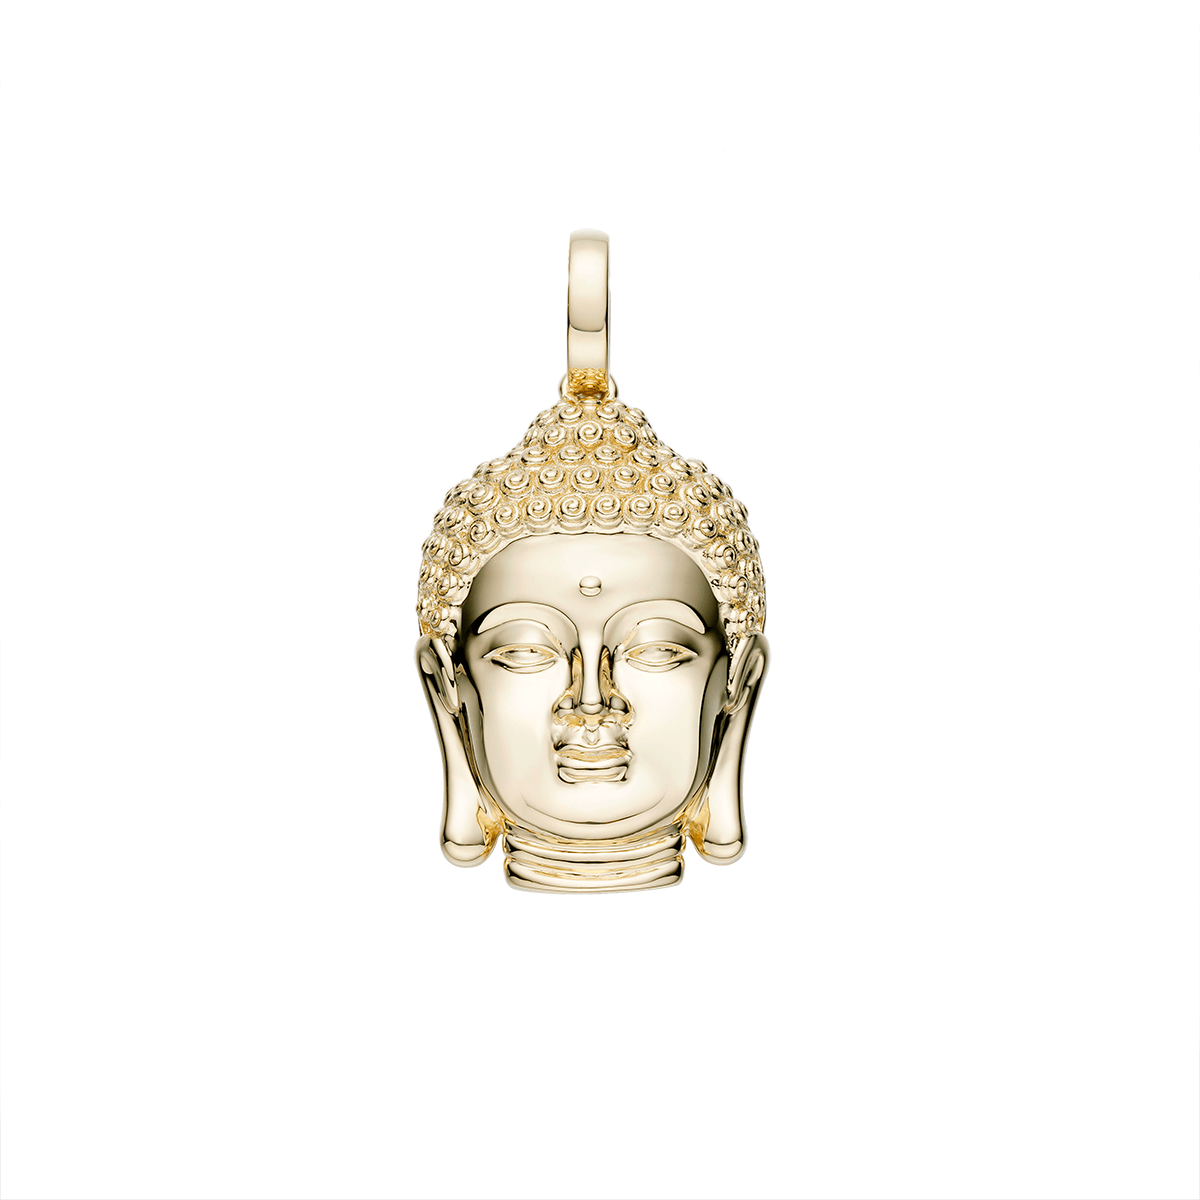 3mm/5mm Figaro Chain Gold Plated Necklace  Buddha pendant necklace,  Necklace types, Gold plated necklace